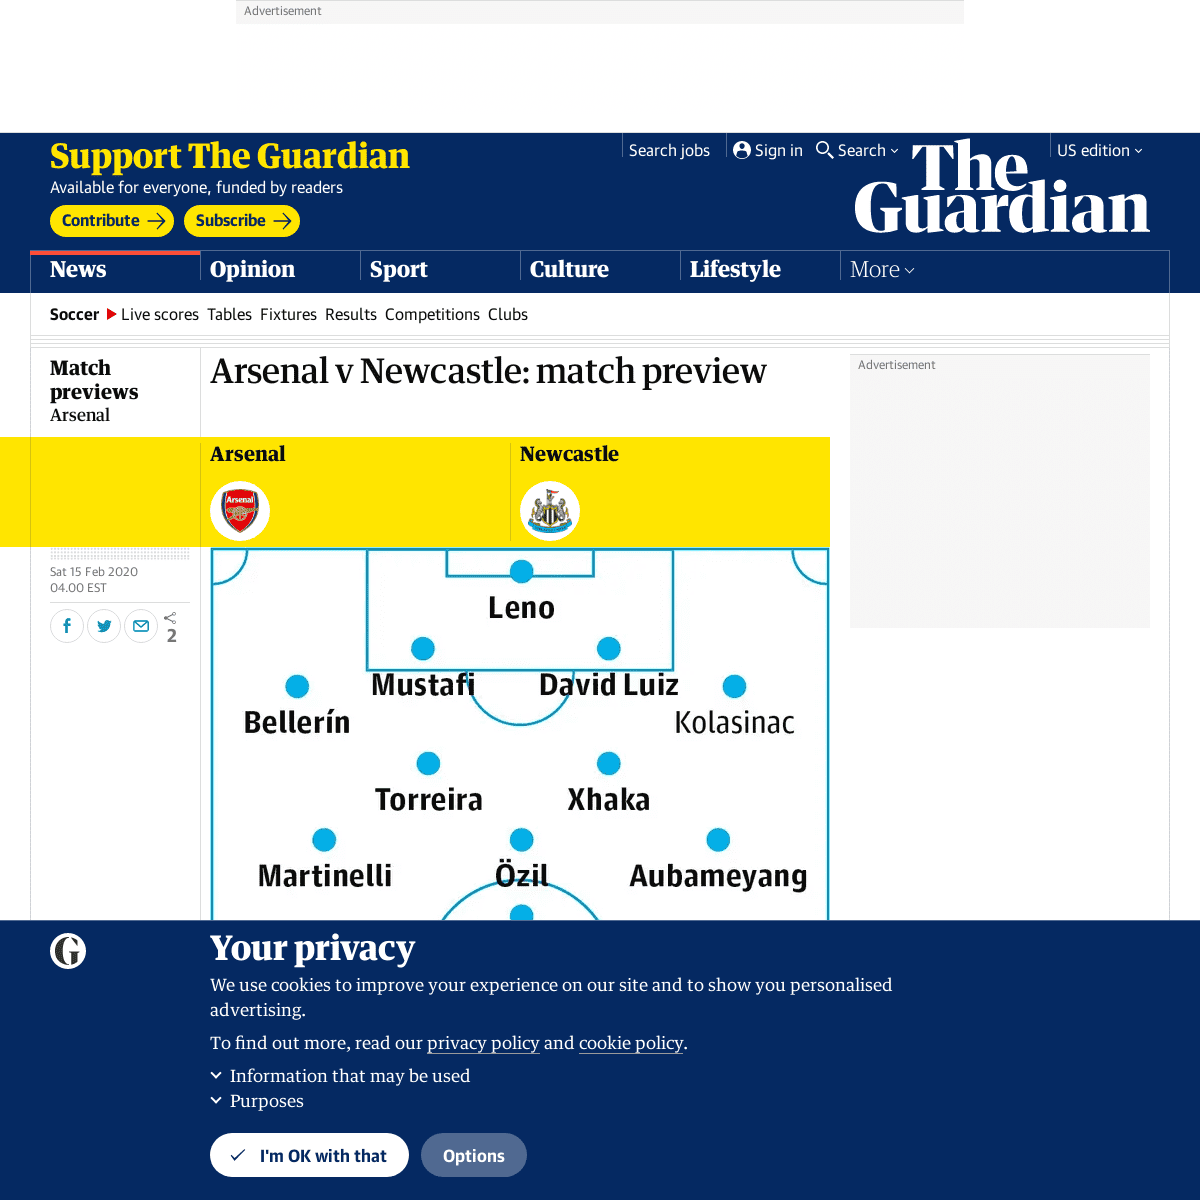 A complete backup of www.theguardian.com/football/2020/feb/15/arsenal-newcastle-match-preview